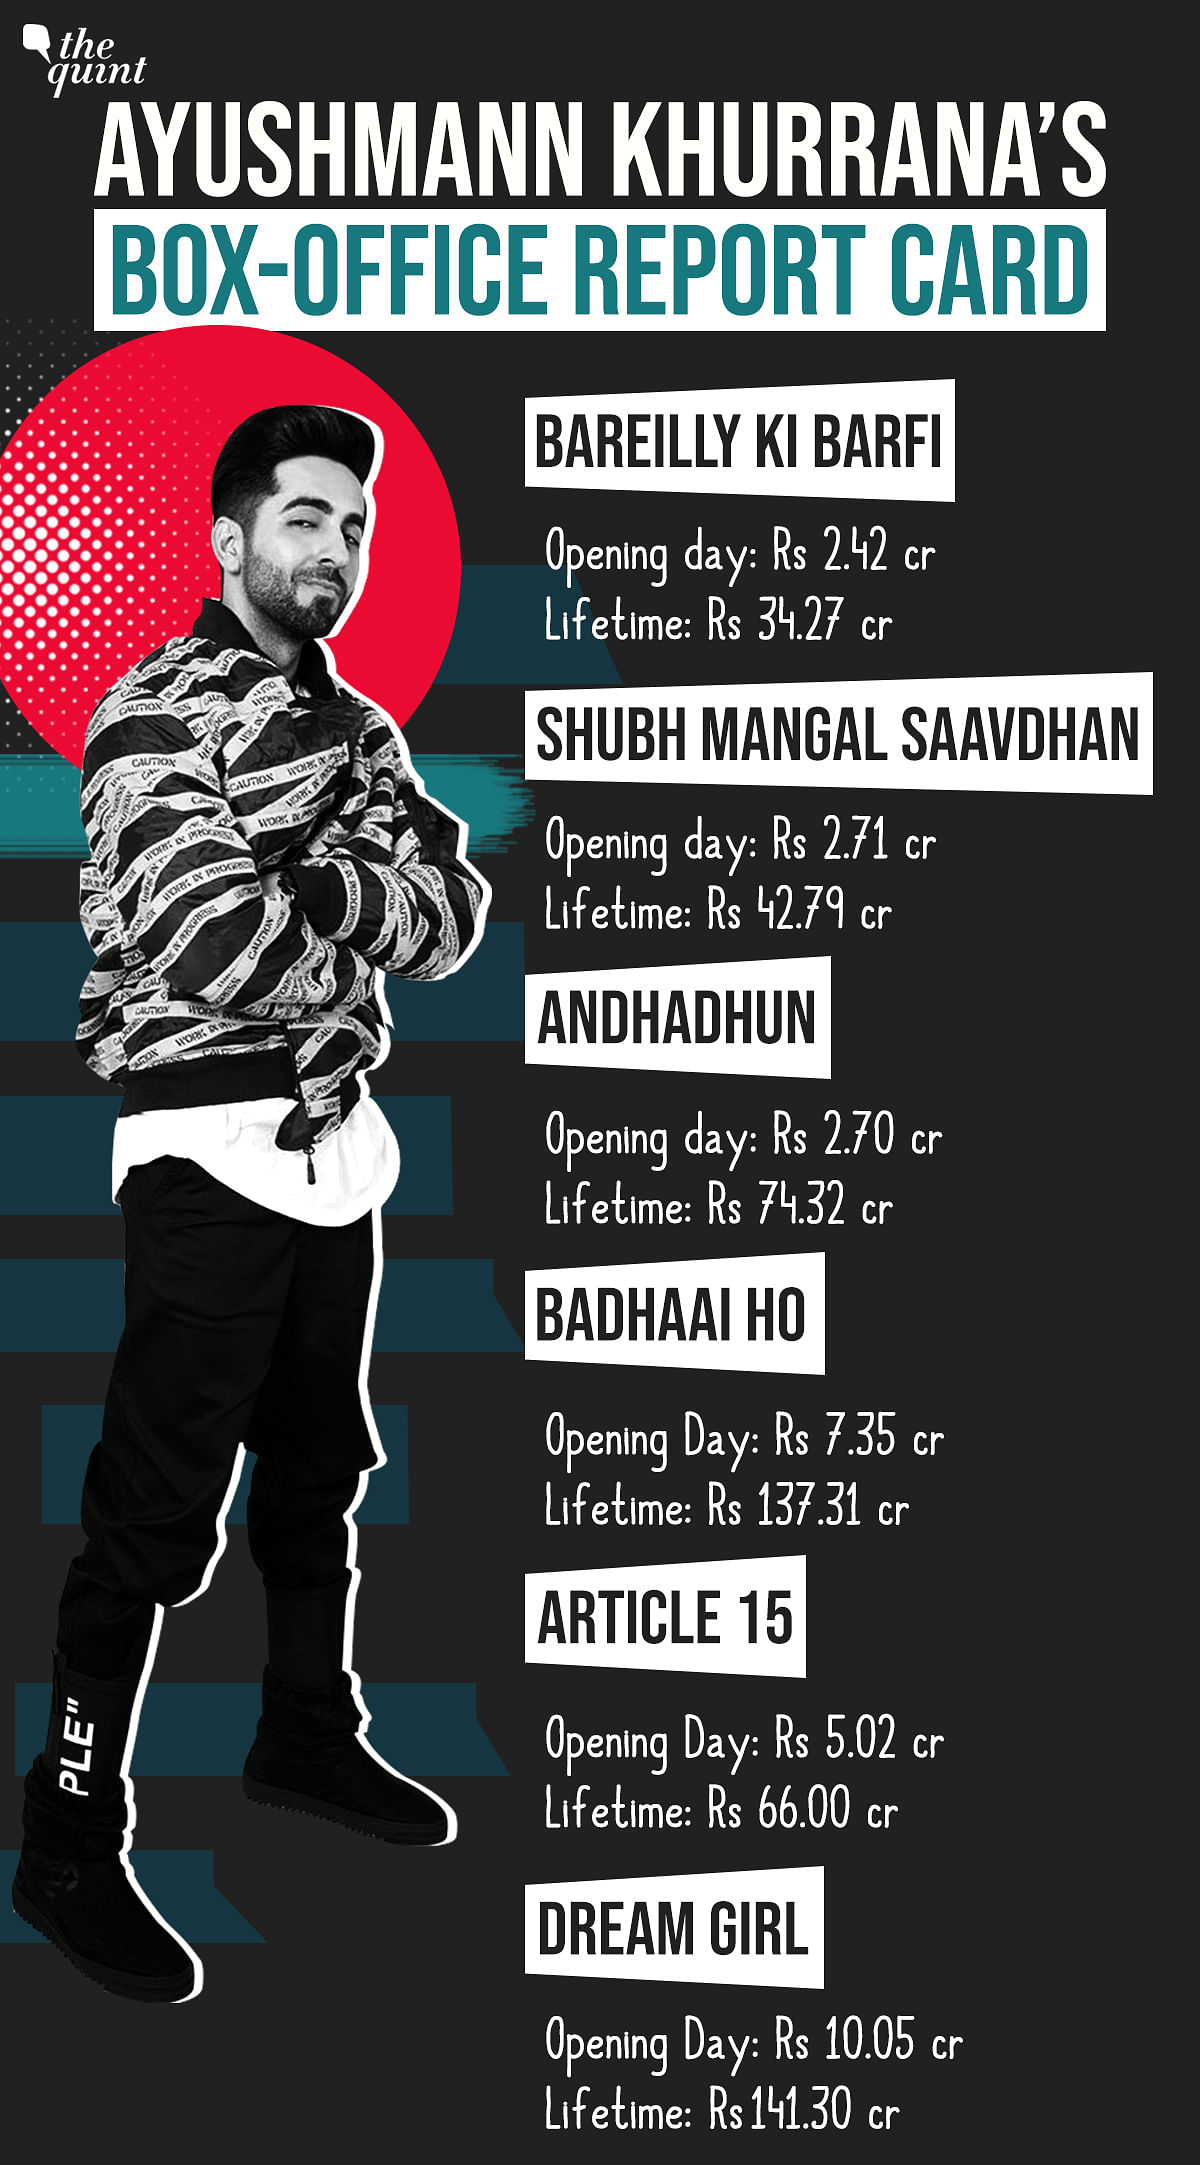 Here’s looking at how Ayushmann has managed to score 7 hits in a row. 